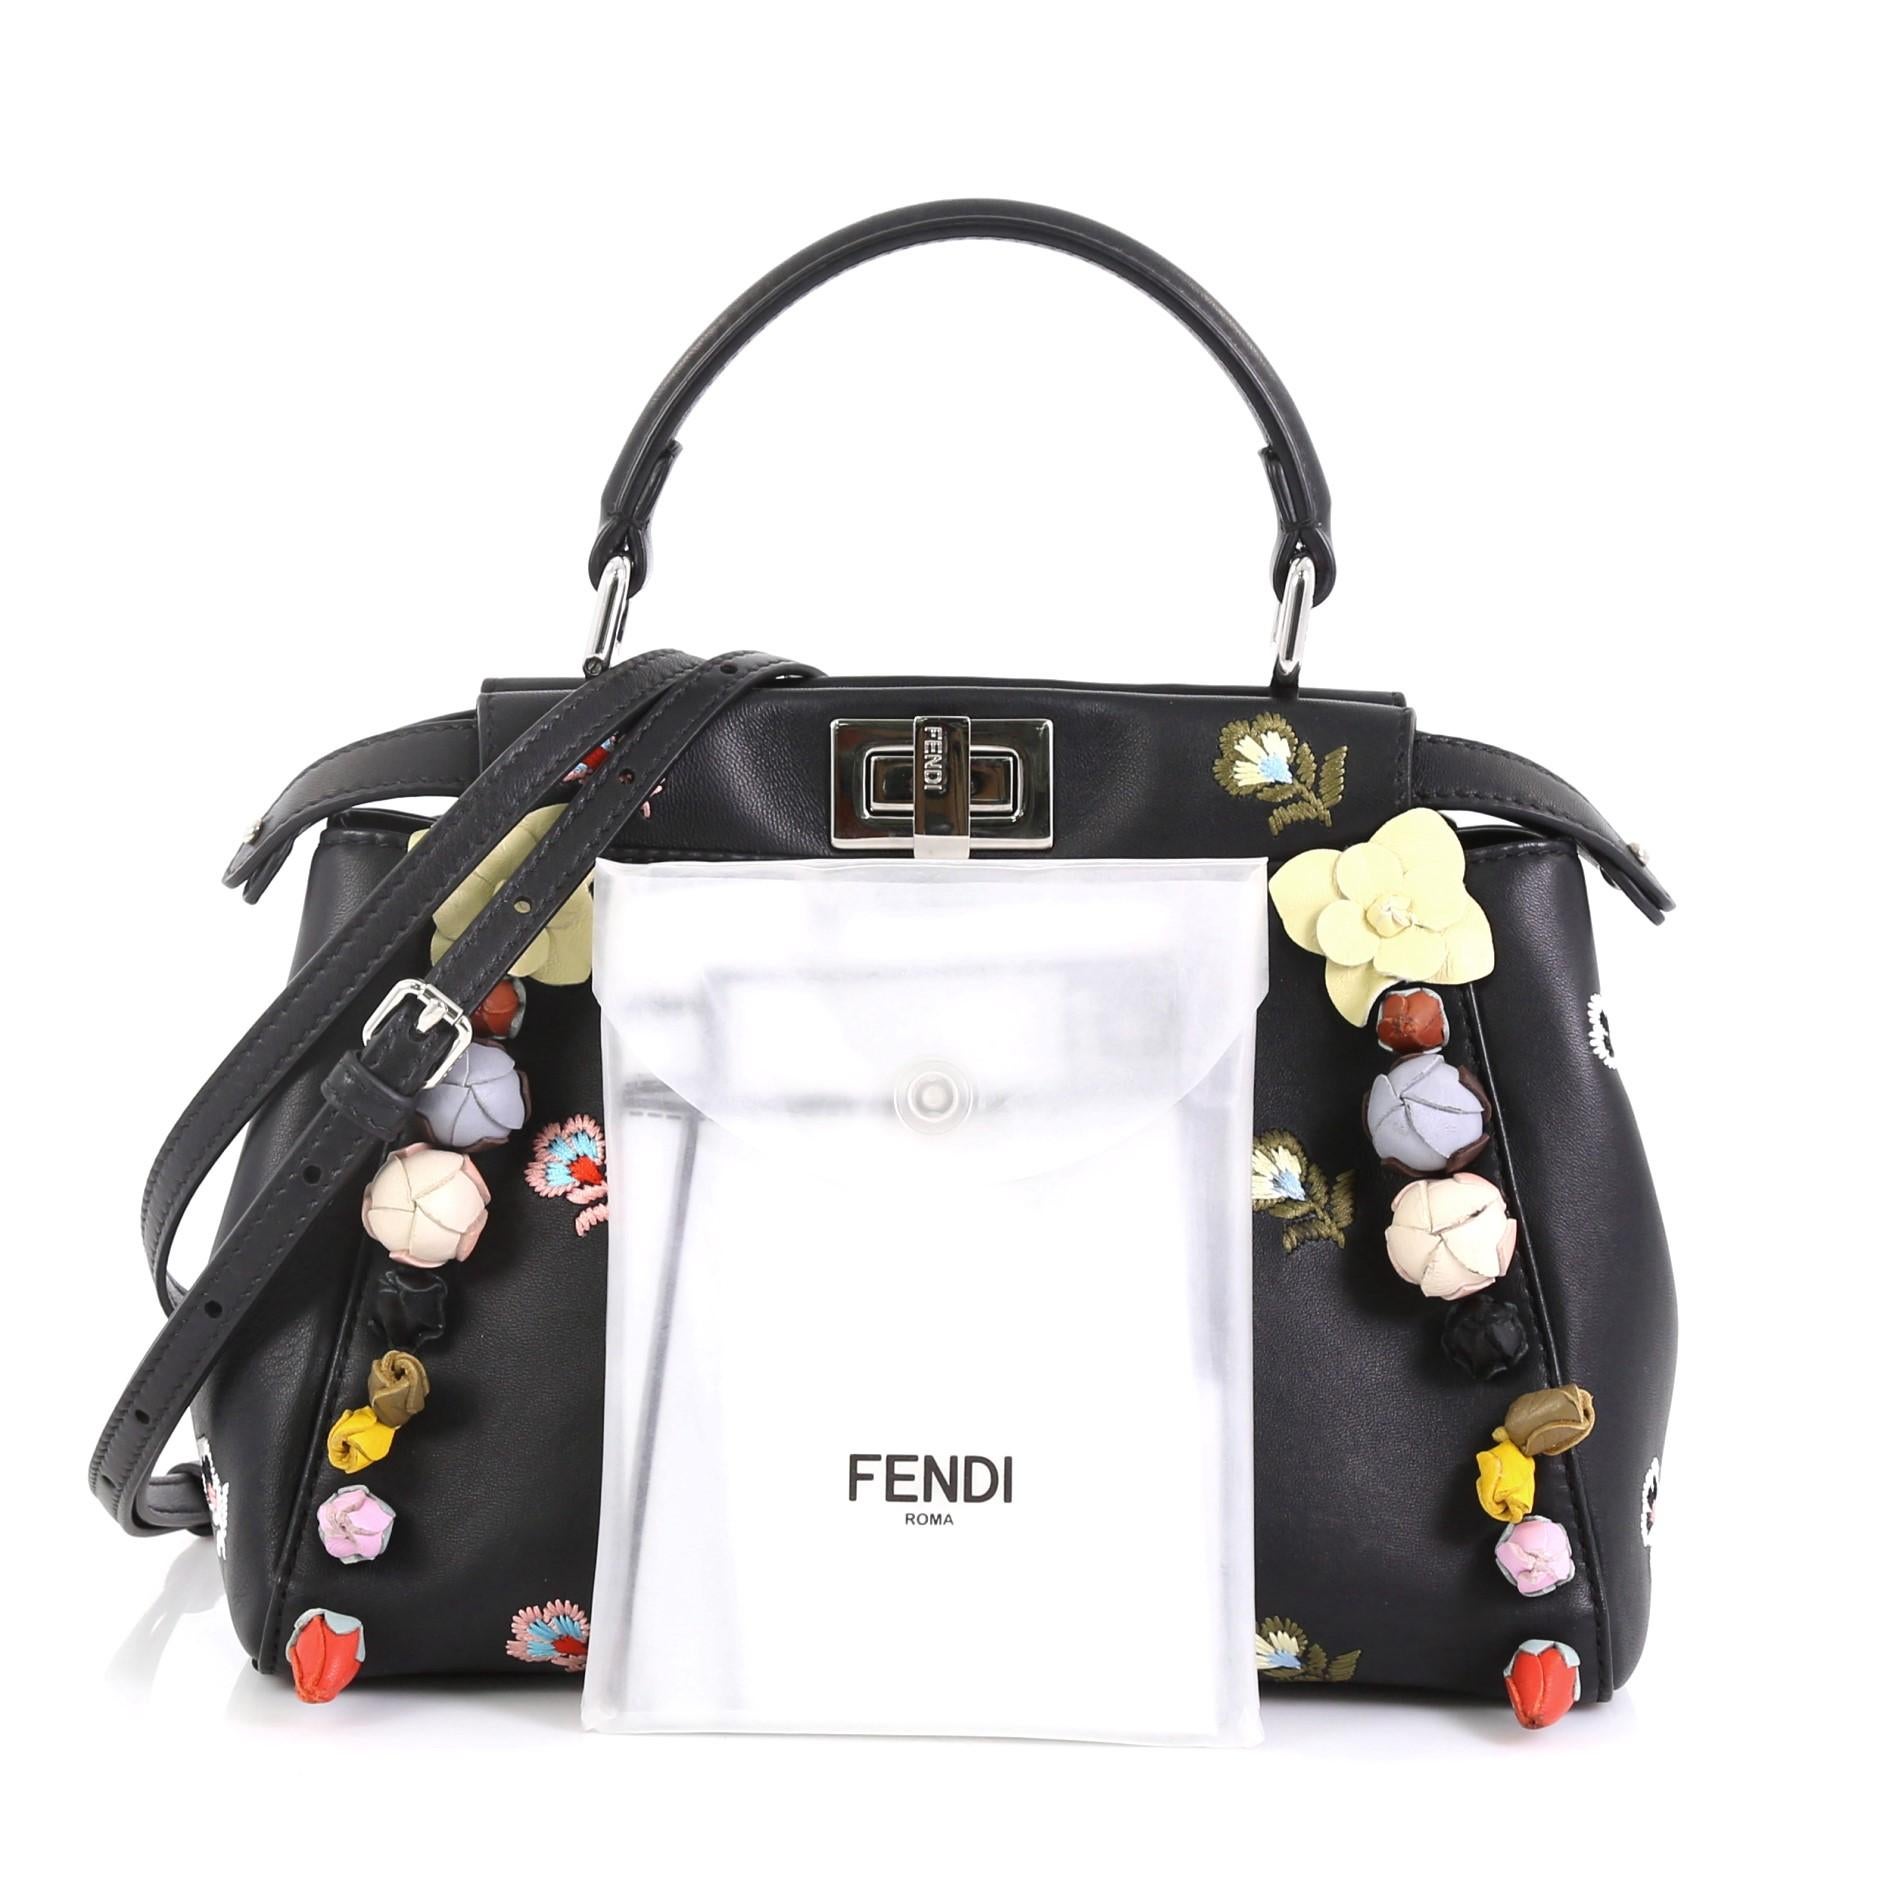 This Fendi Peekaboo Bag Embroidered Leather with Floral Applique Mini, crafted in black leather, features leather top handle, embroidered floral prints with floral applique, bar frame and silver-tone hardware. Its turn-lock closure opens to a black